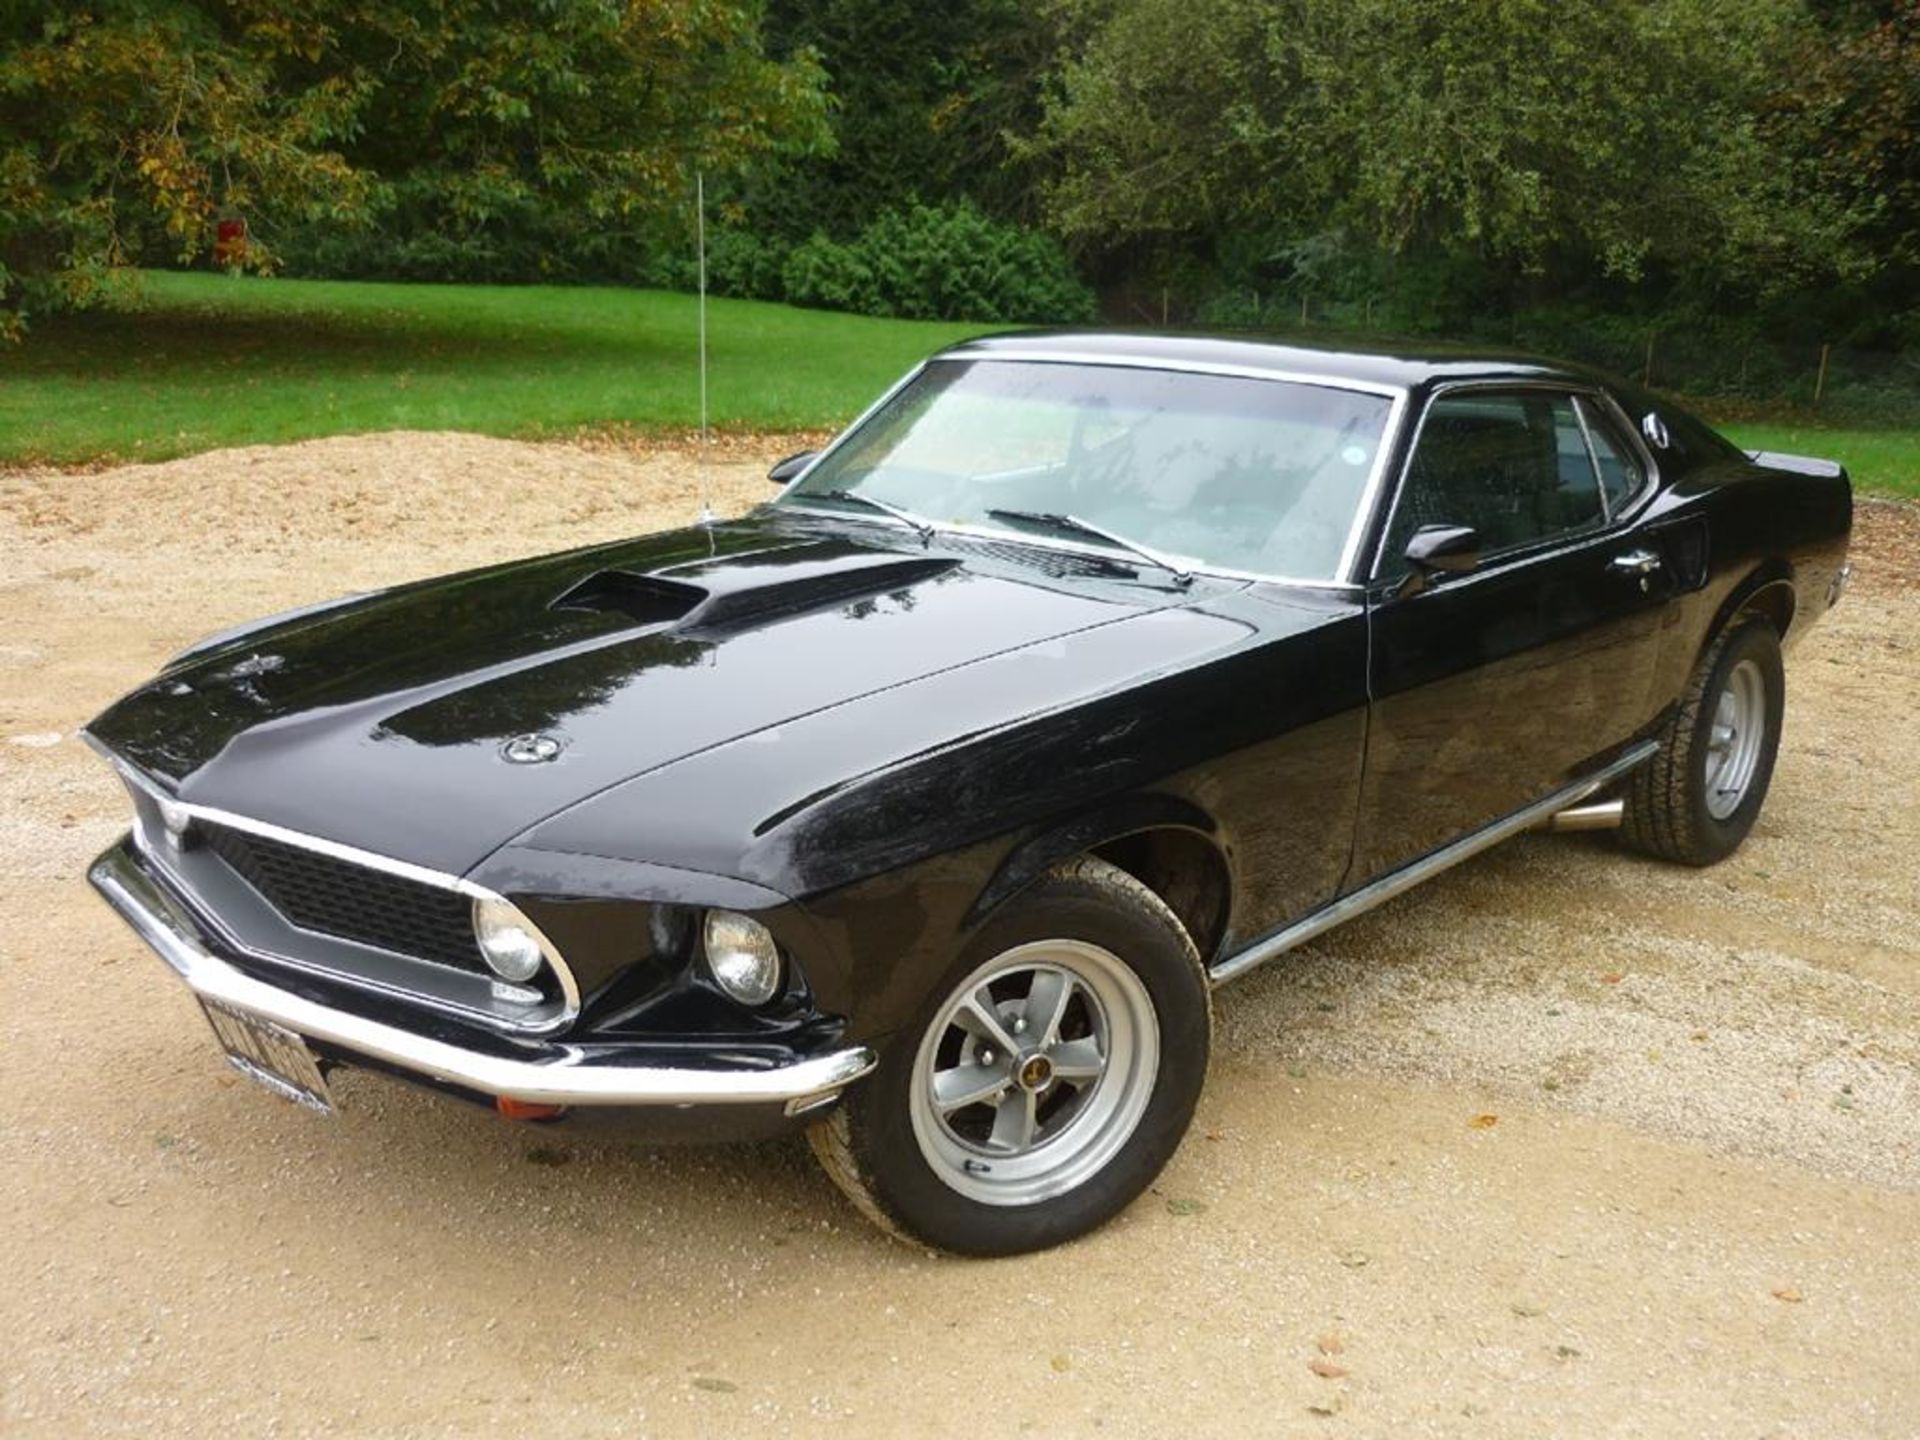 A 1969 Ford Mustang Fastback 351, registration number BWA 691G, chassis number 9T02H185415, black